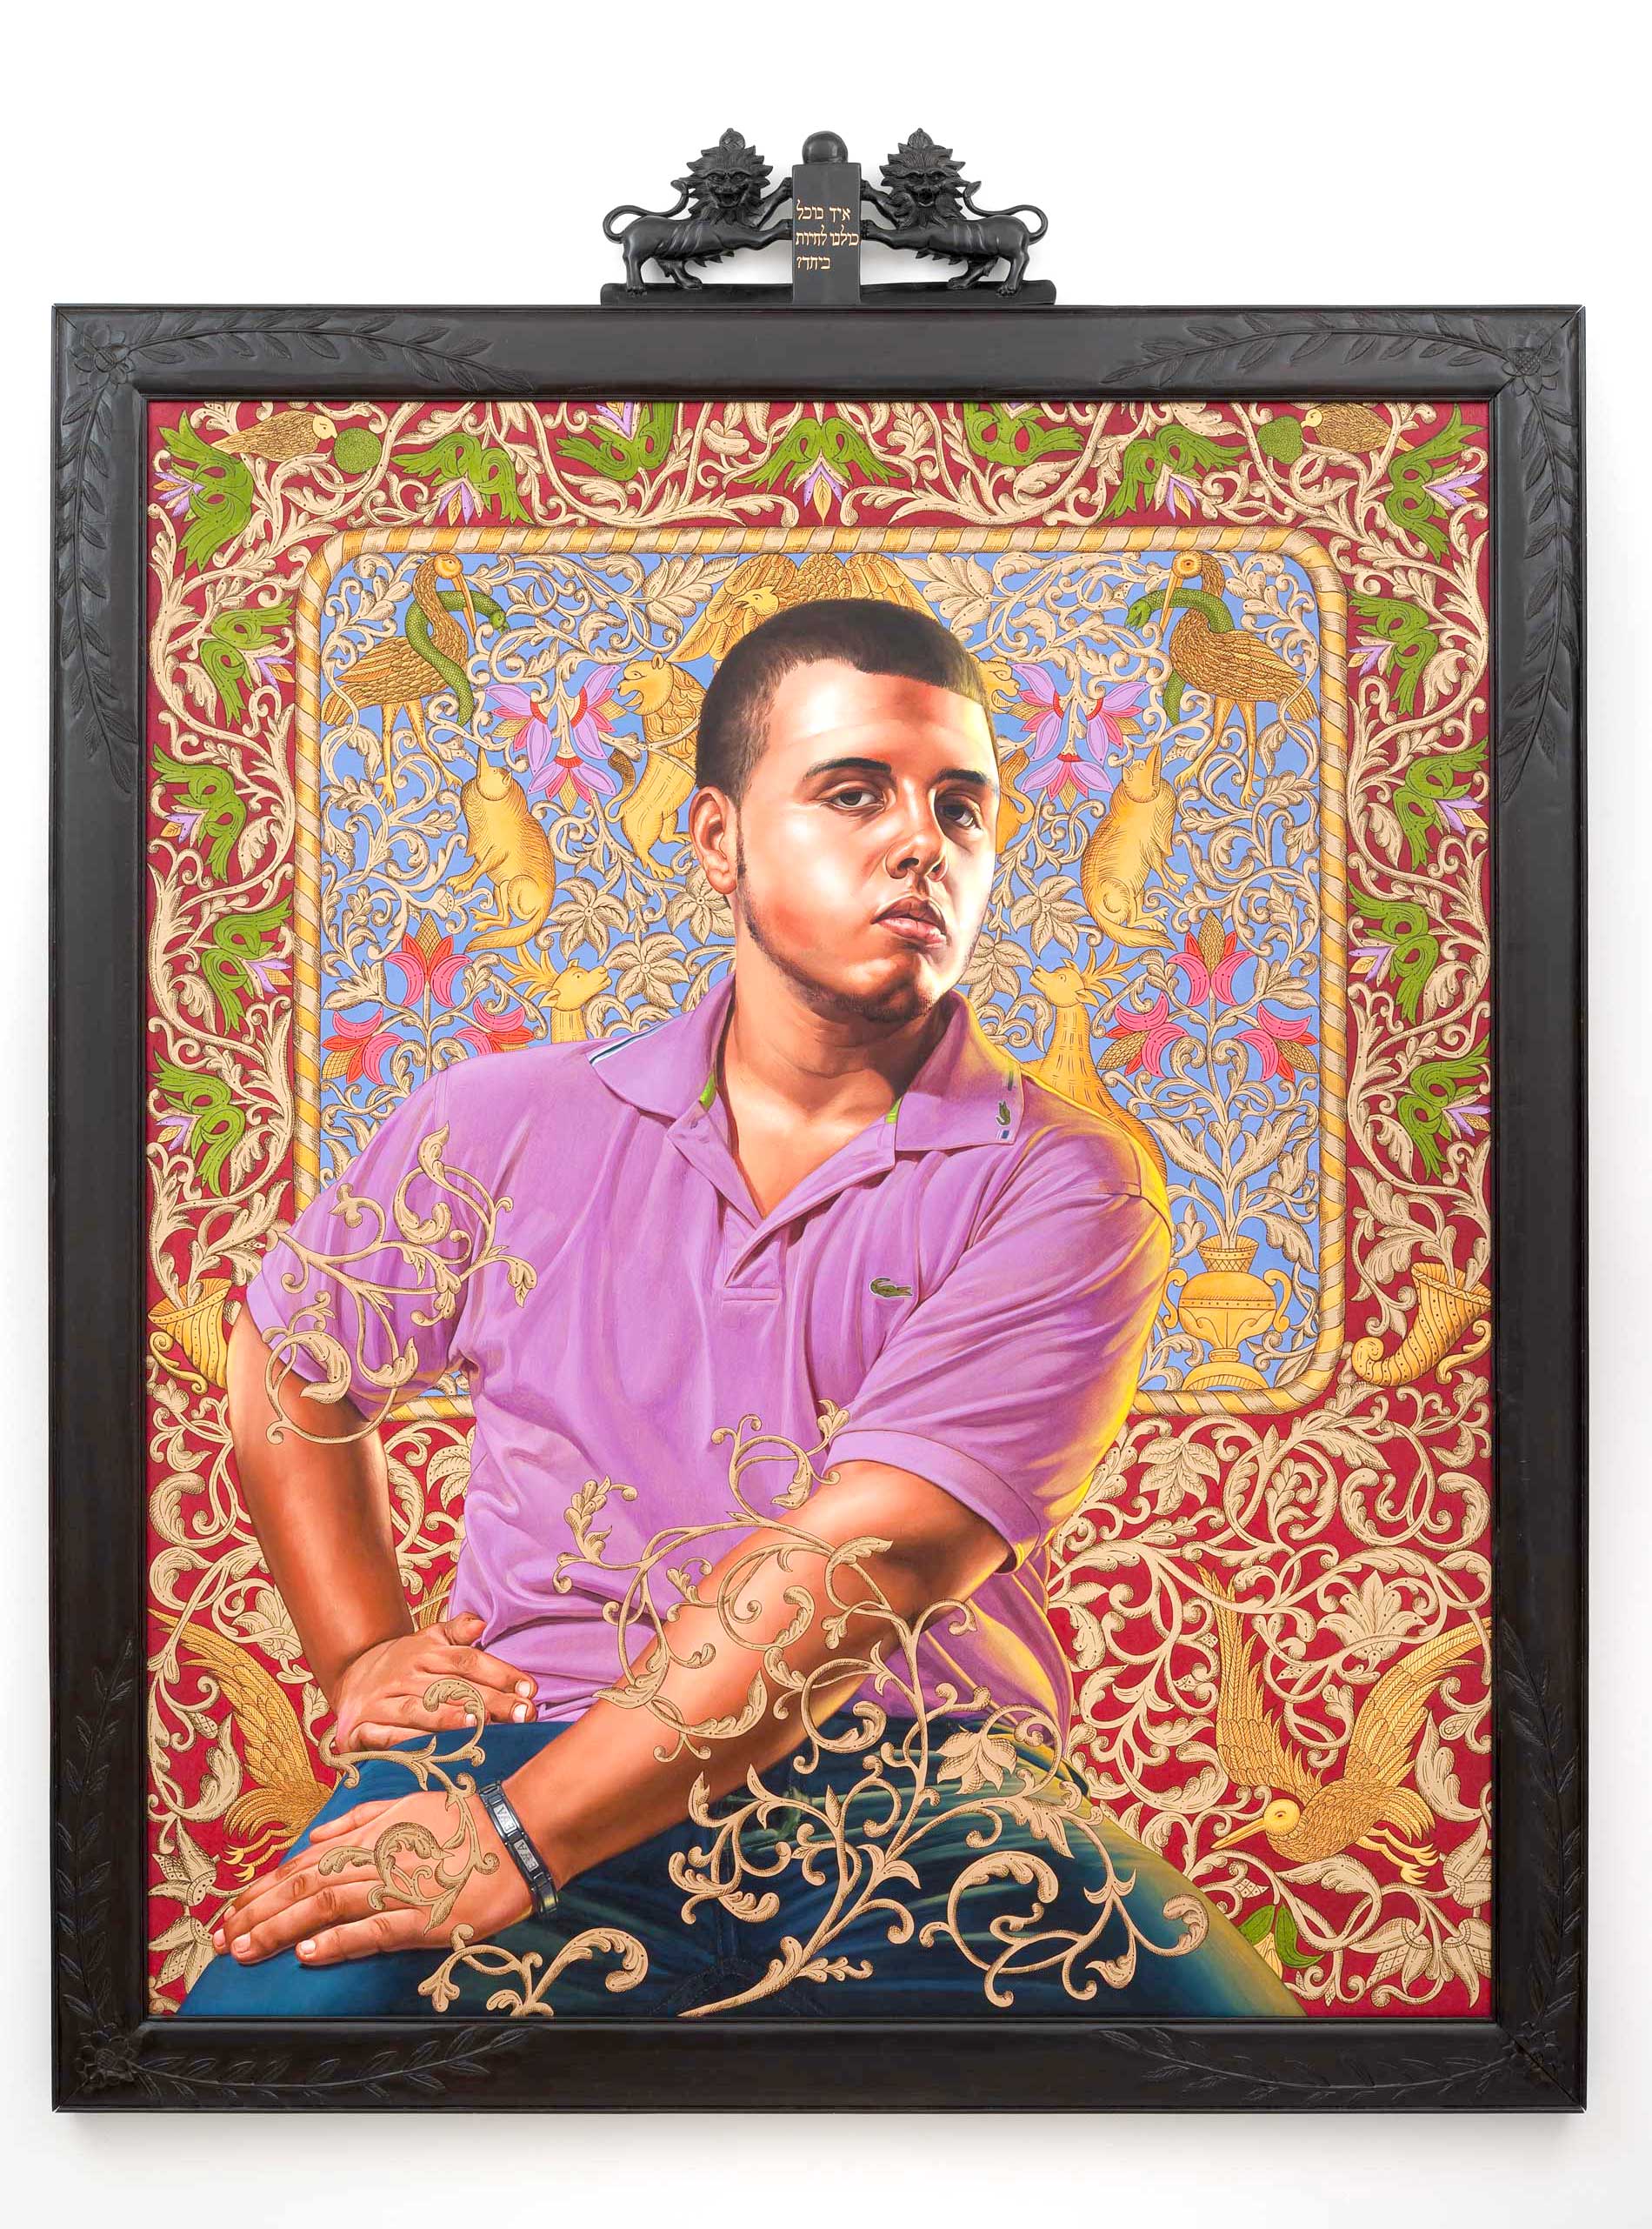 Kehinde Wiley | The World Stage: Israel | Hamza El Essawi, 2011 Oil and Gold Enamel on Canvas. | 4